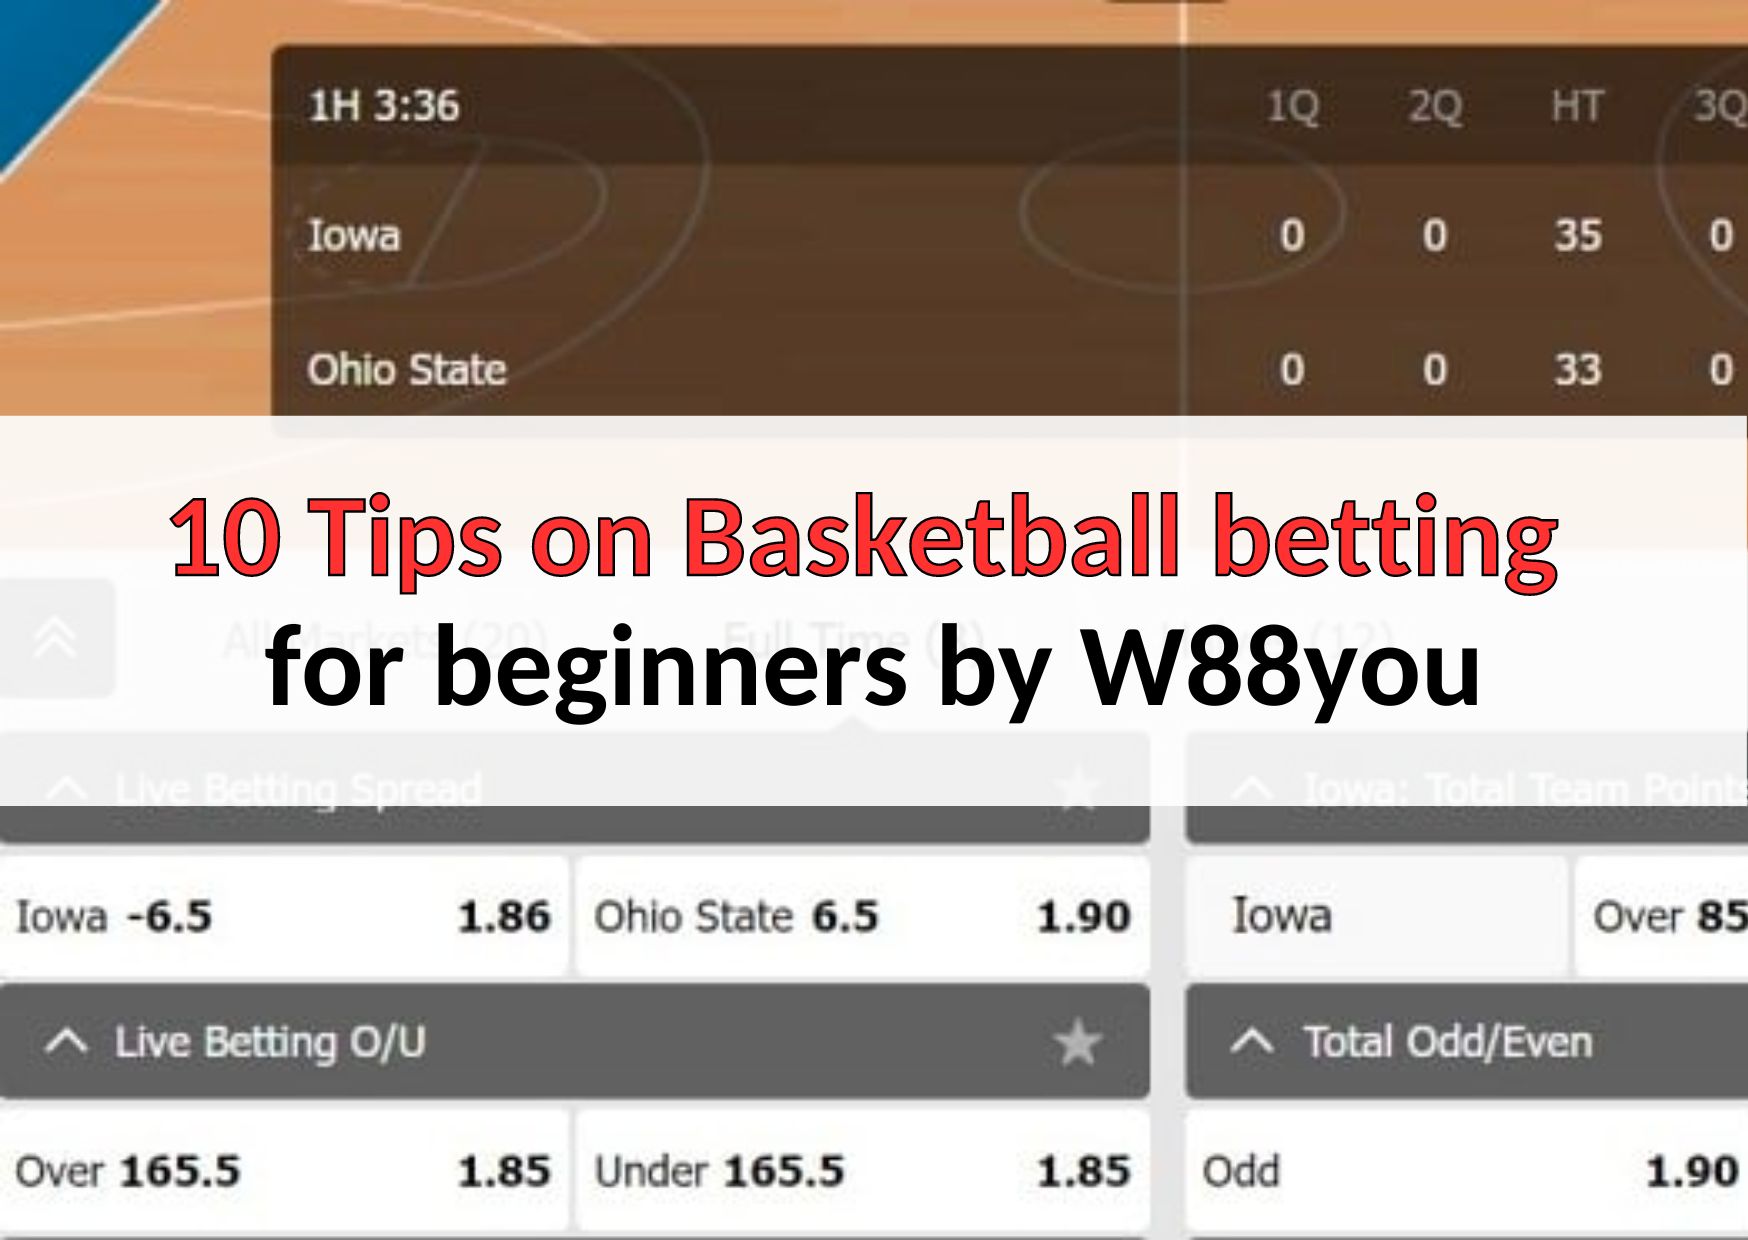 10 Proven Tips on Basketball betting for beginners by W88you